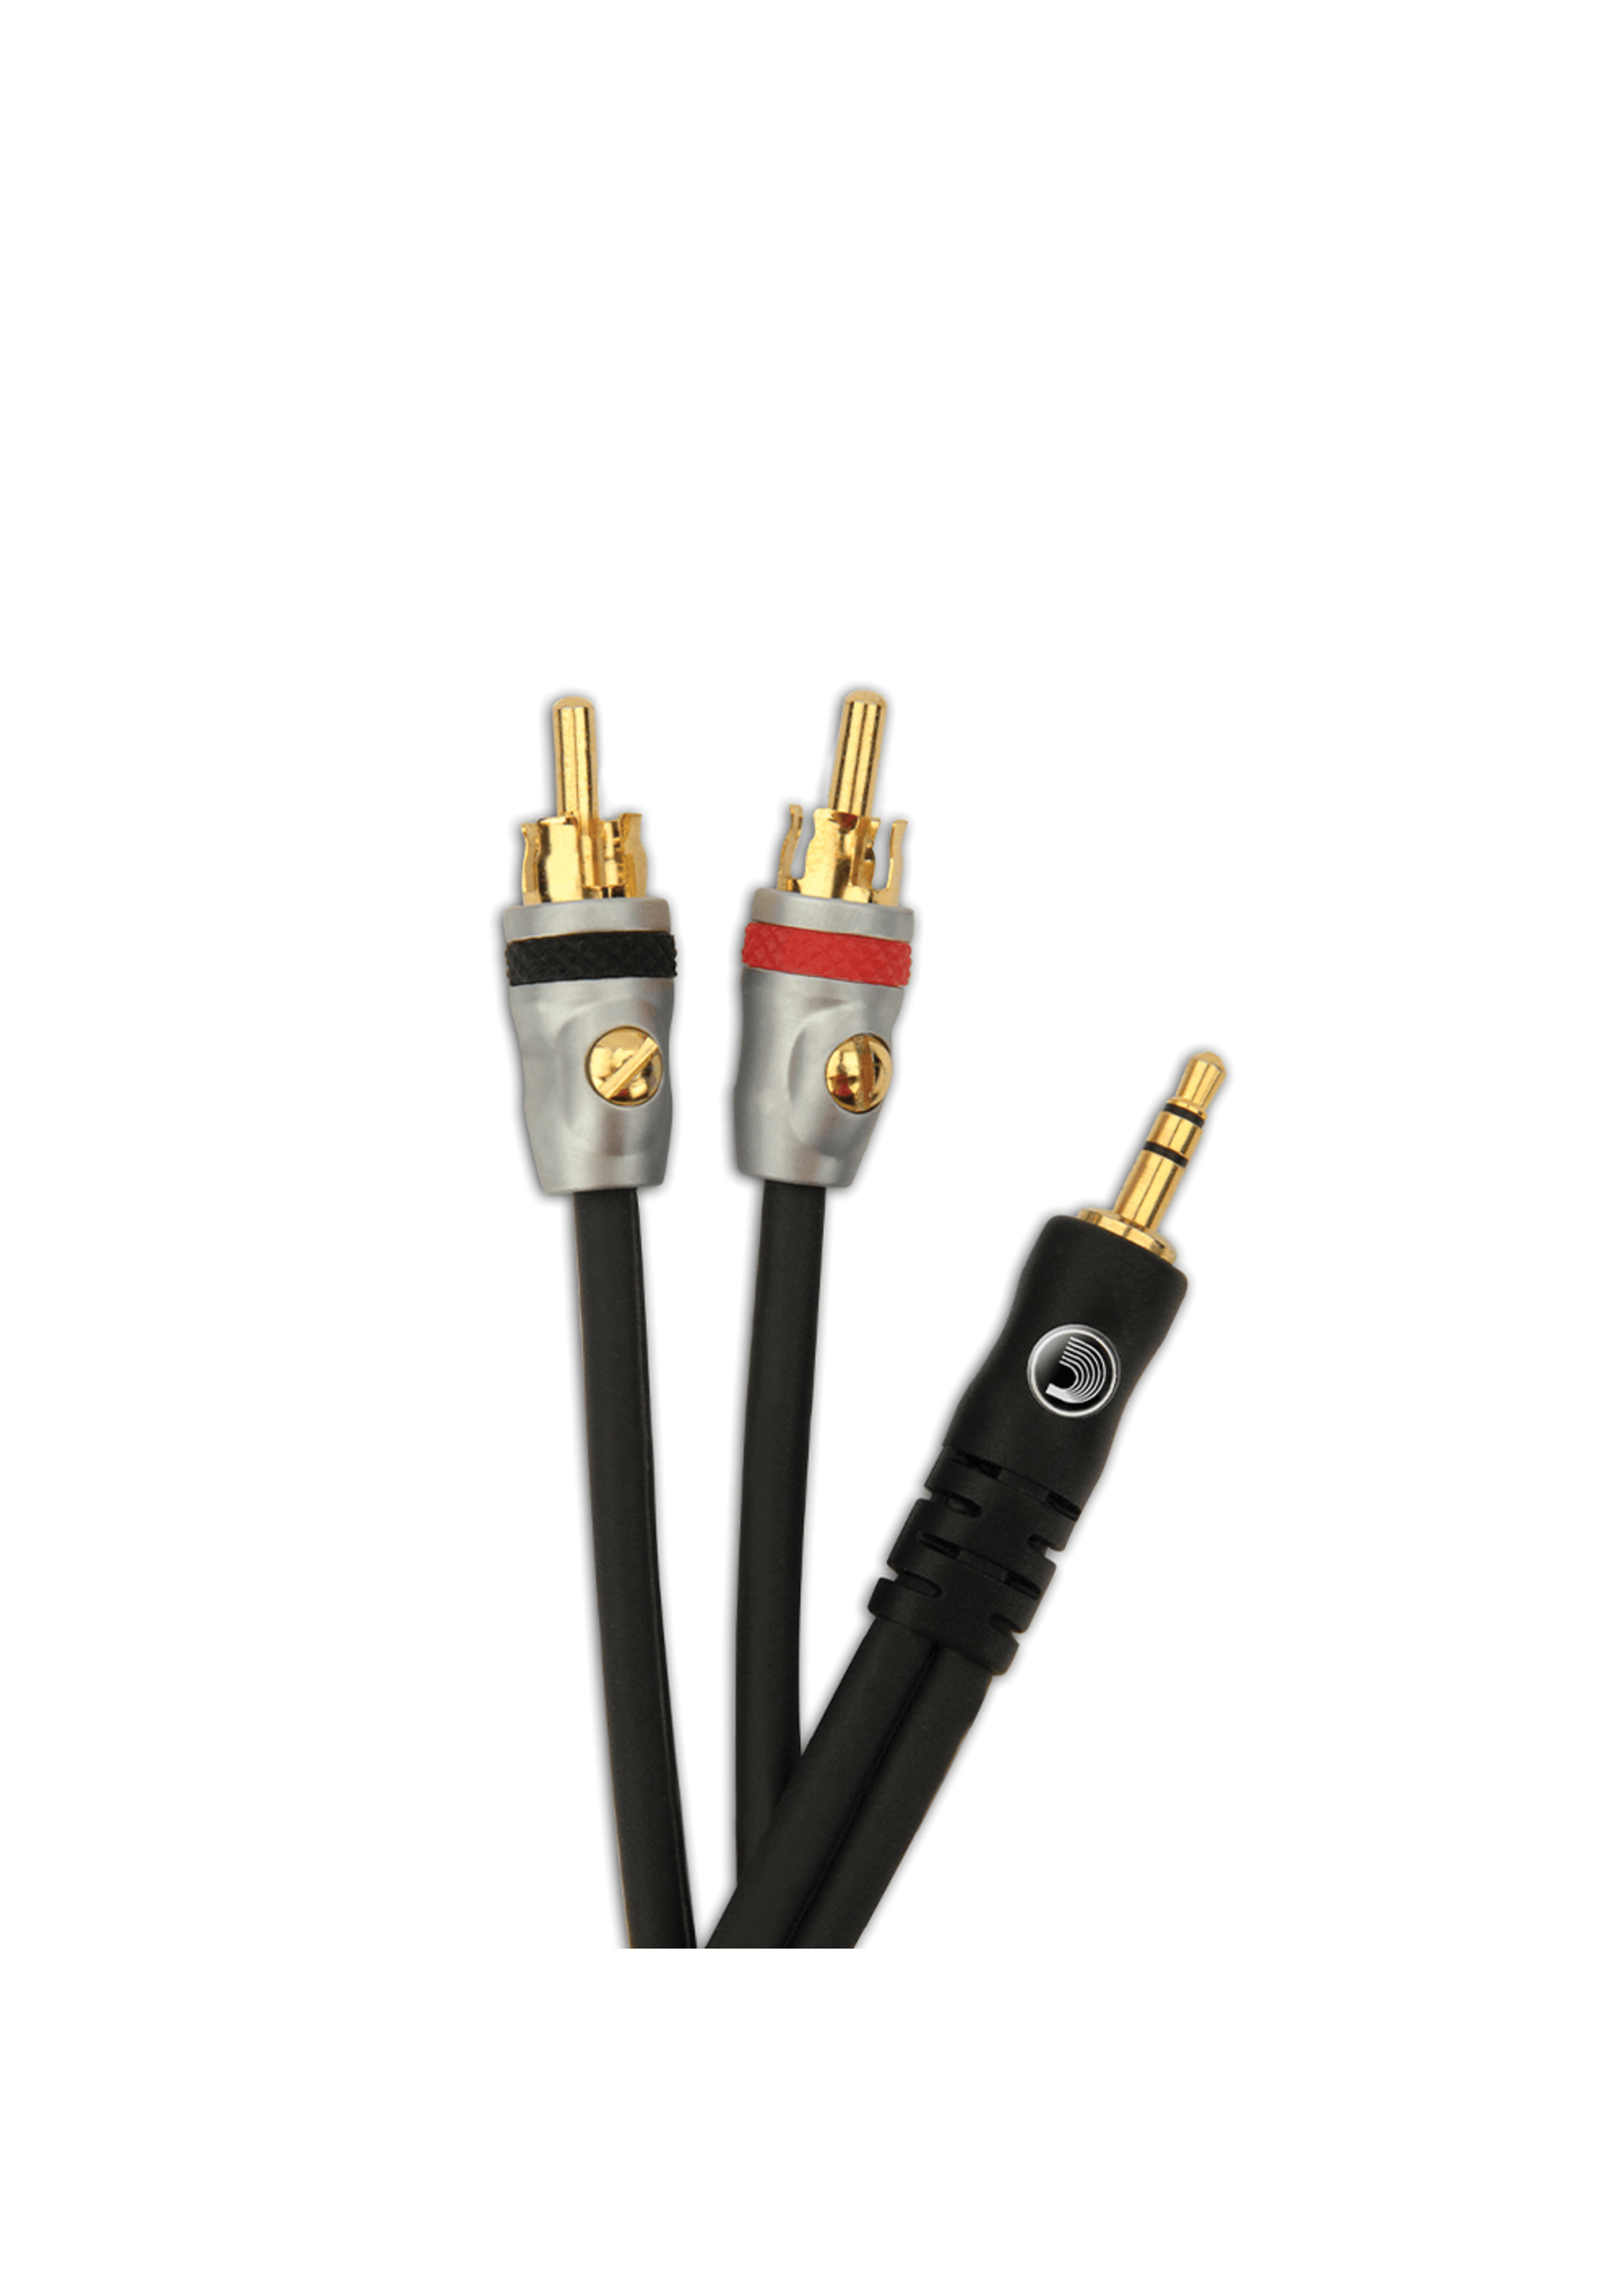 Planet Waves Planet Waves Dual RCA Stereo Mini Cable MP-05